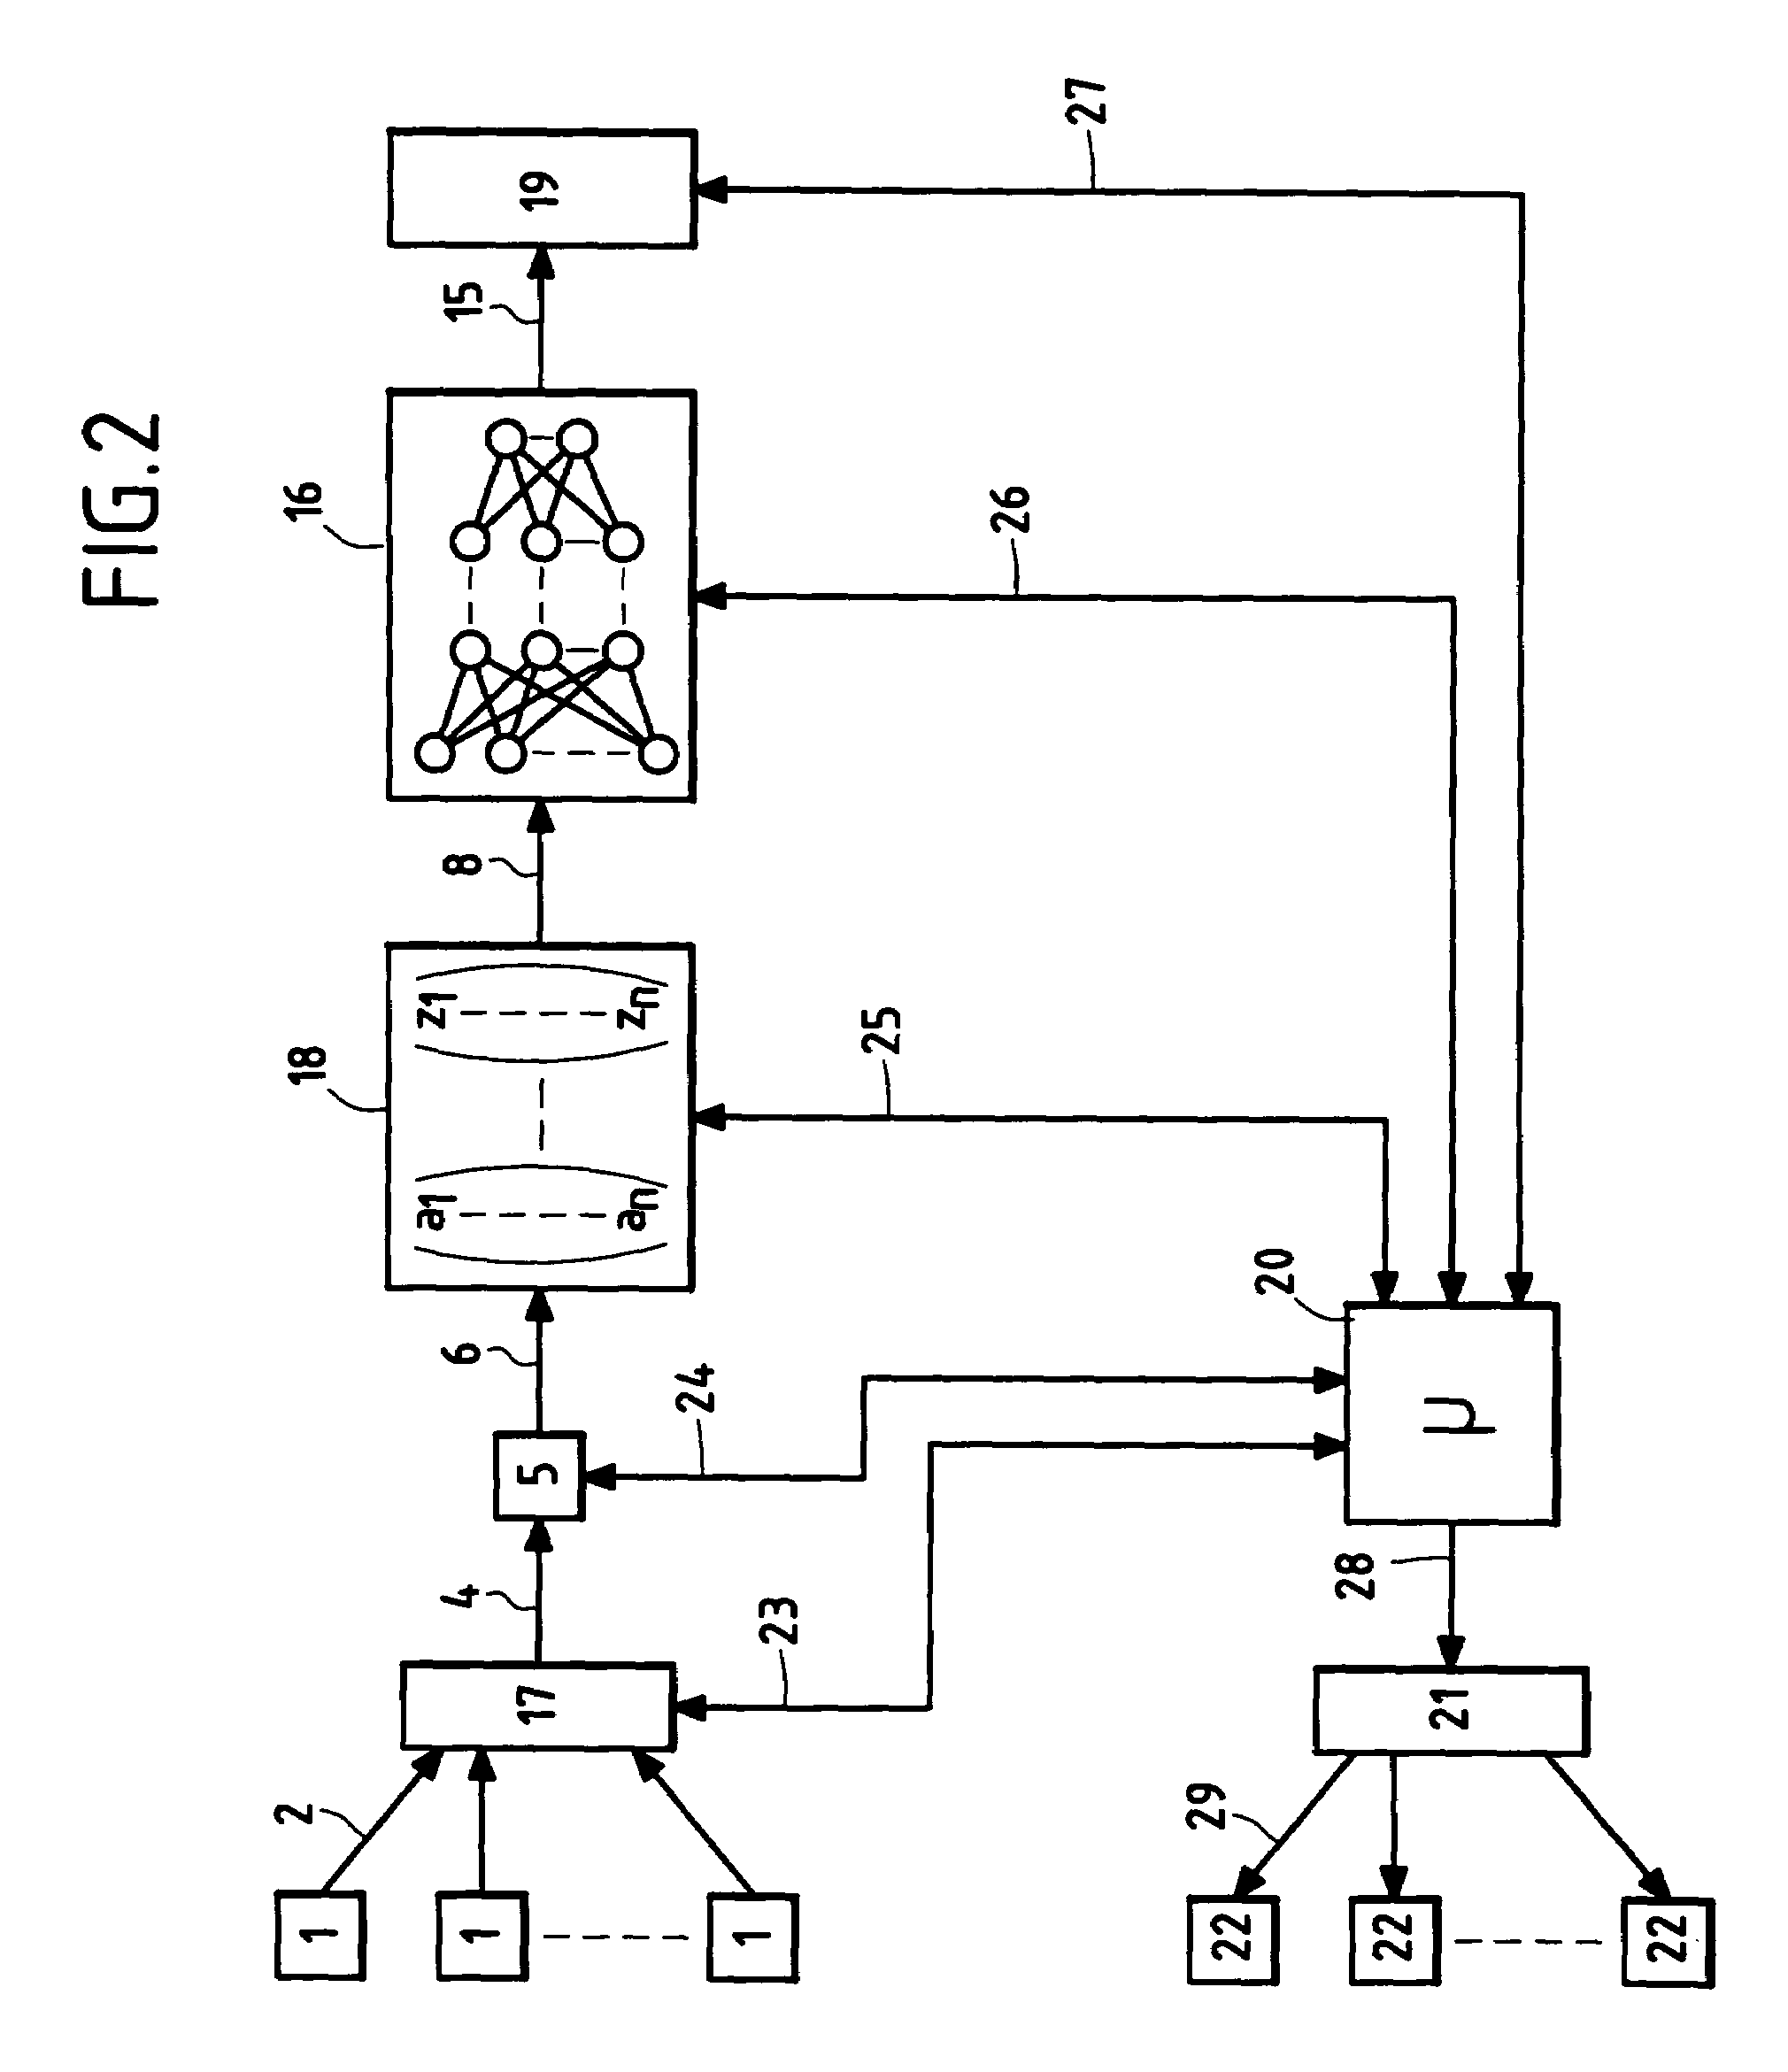 Method and device for optical detection of the position of an object